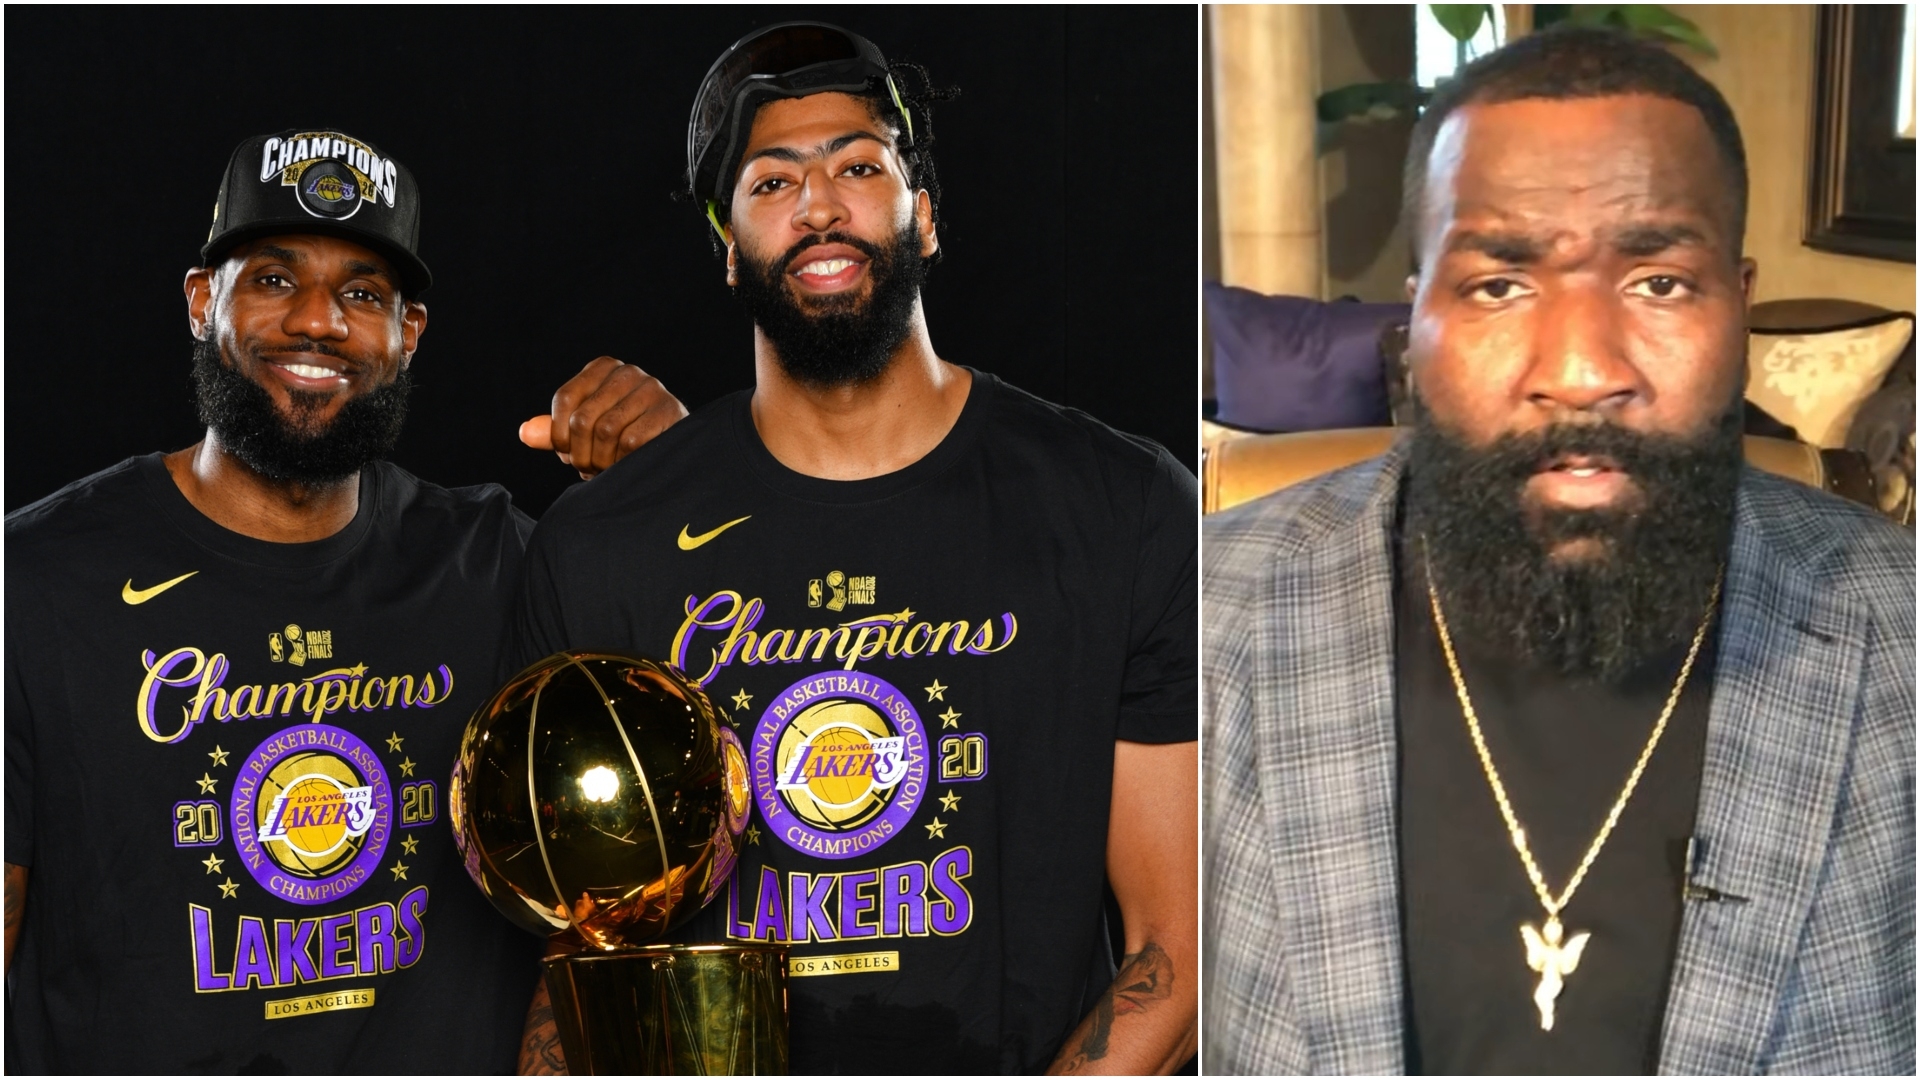 With AD and LeBron signed up, how many more rings will the Lakers get